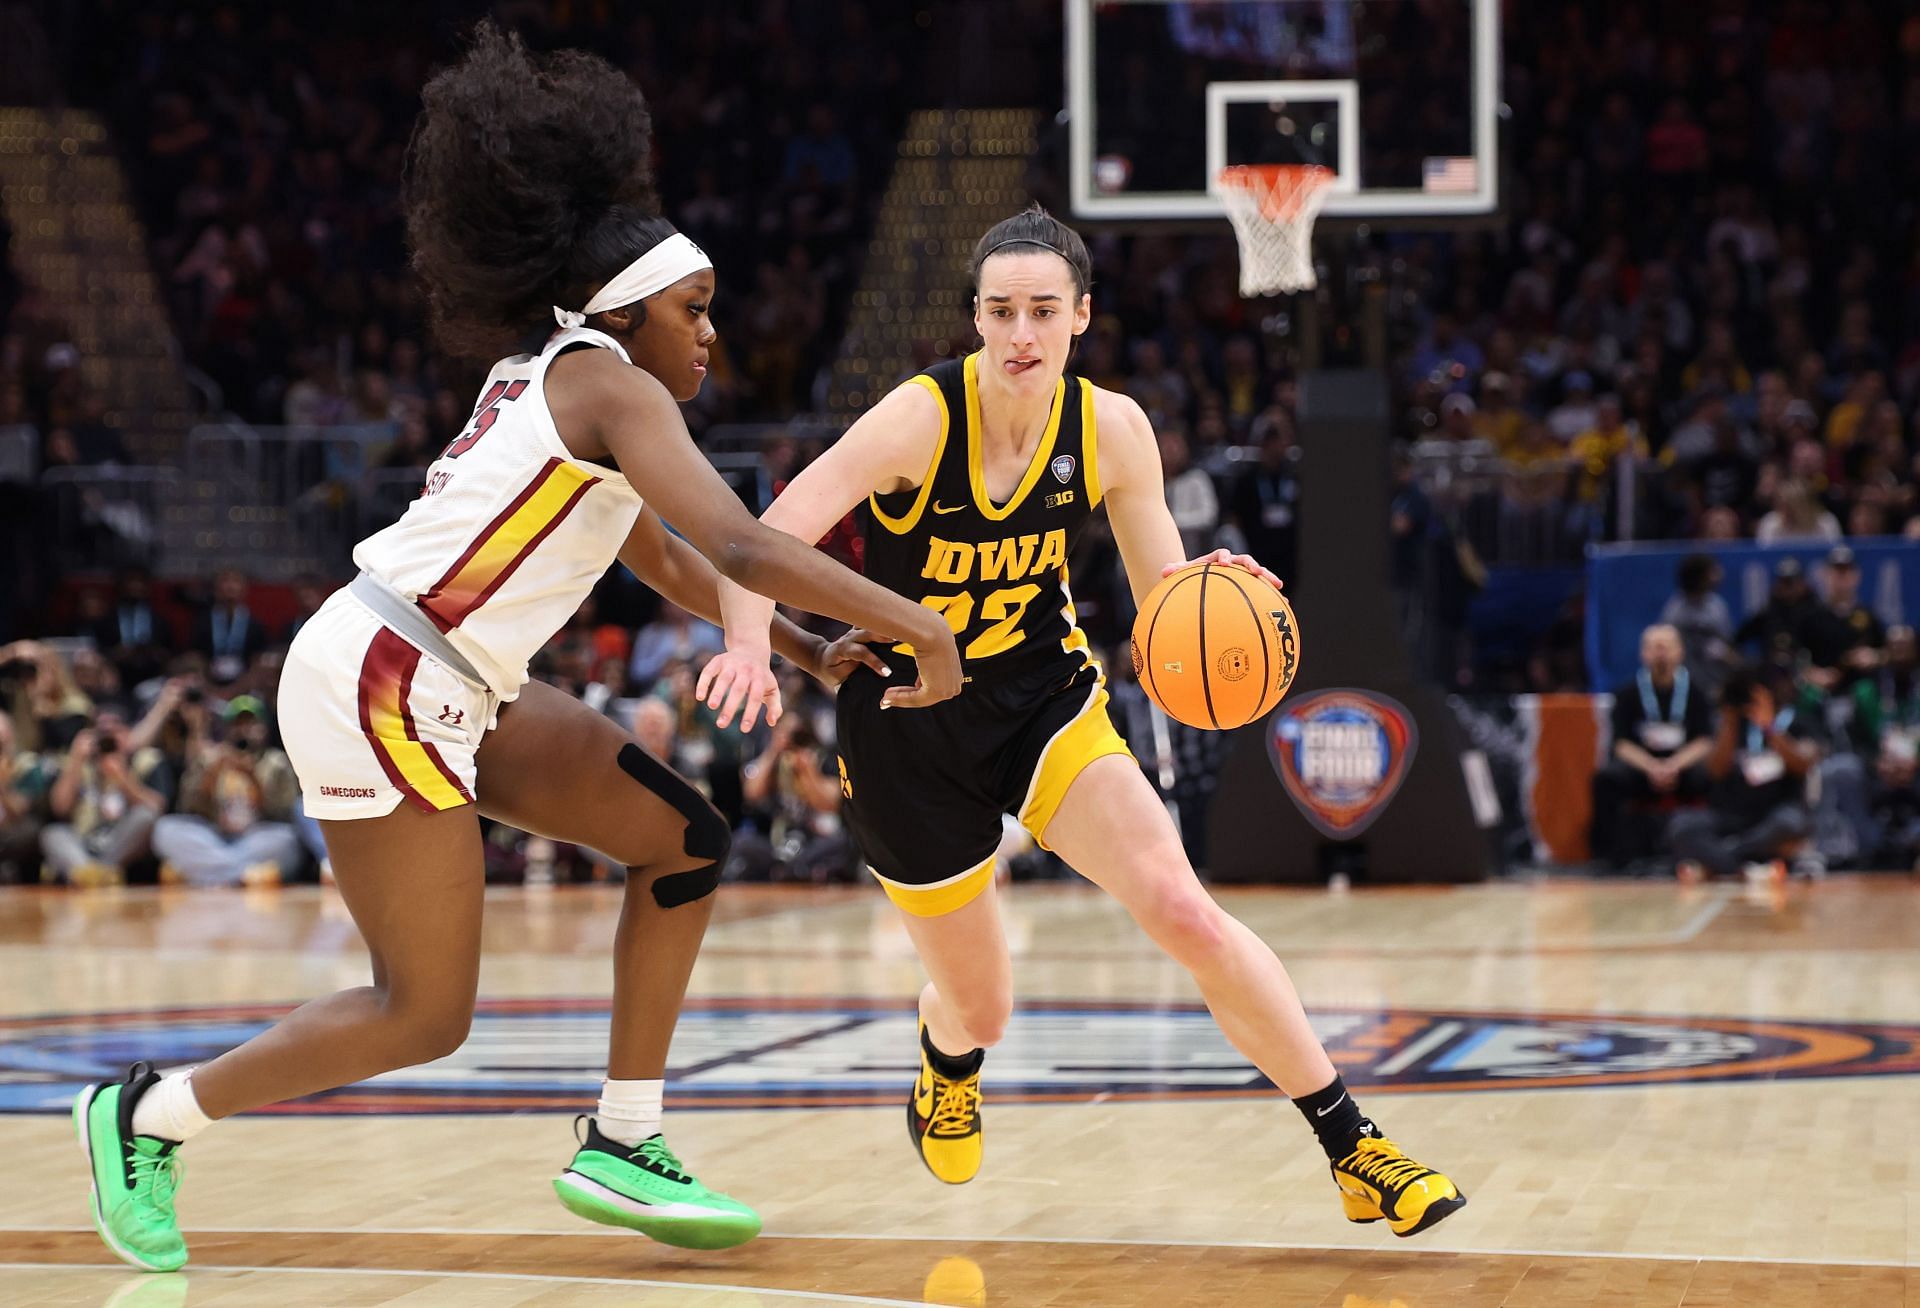 Caitlin Clark will bring her talents to the WNBA and is expected to be a key contributor with the Indiana Fever moving forward.